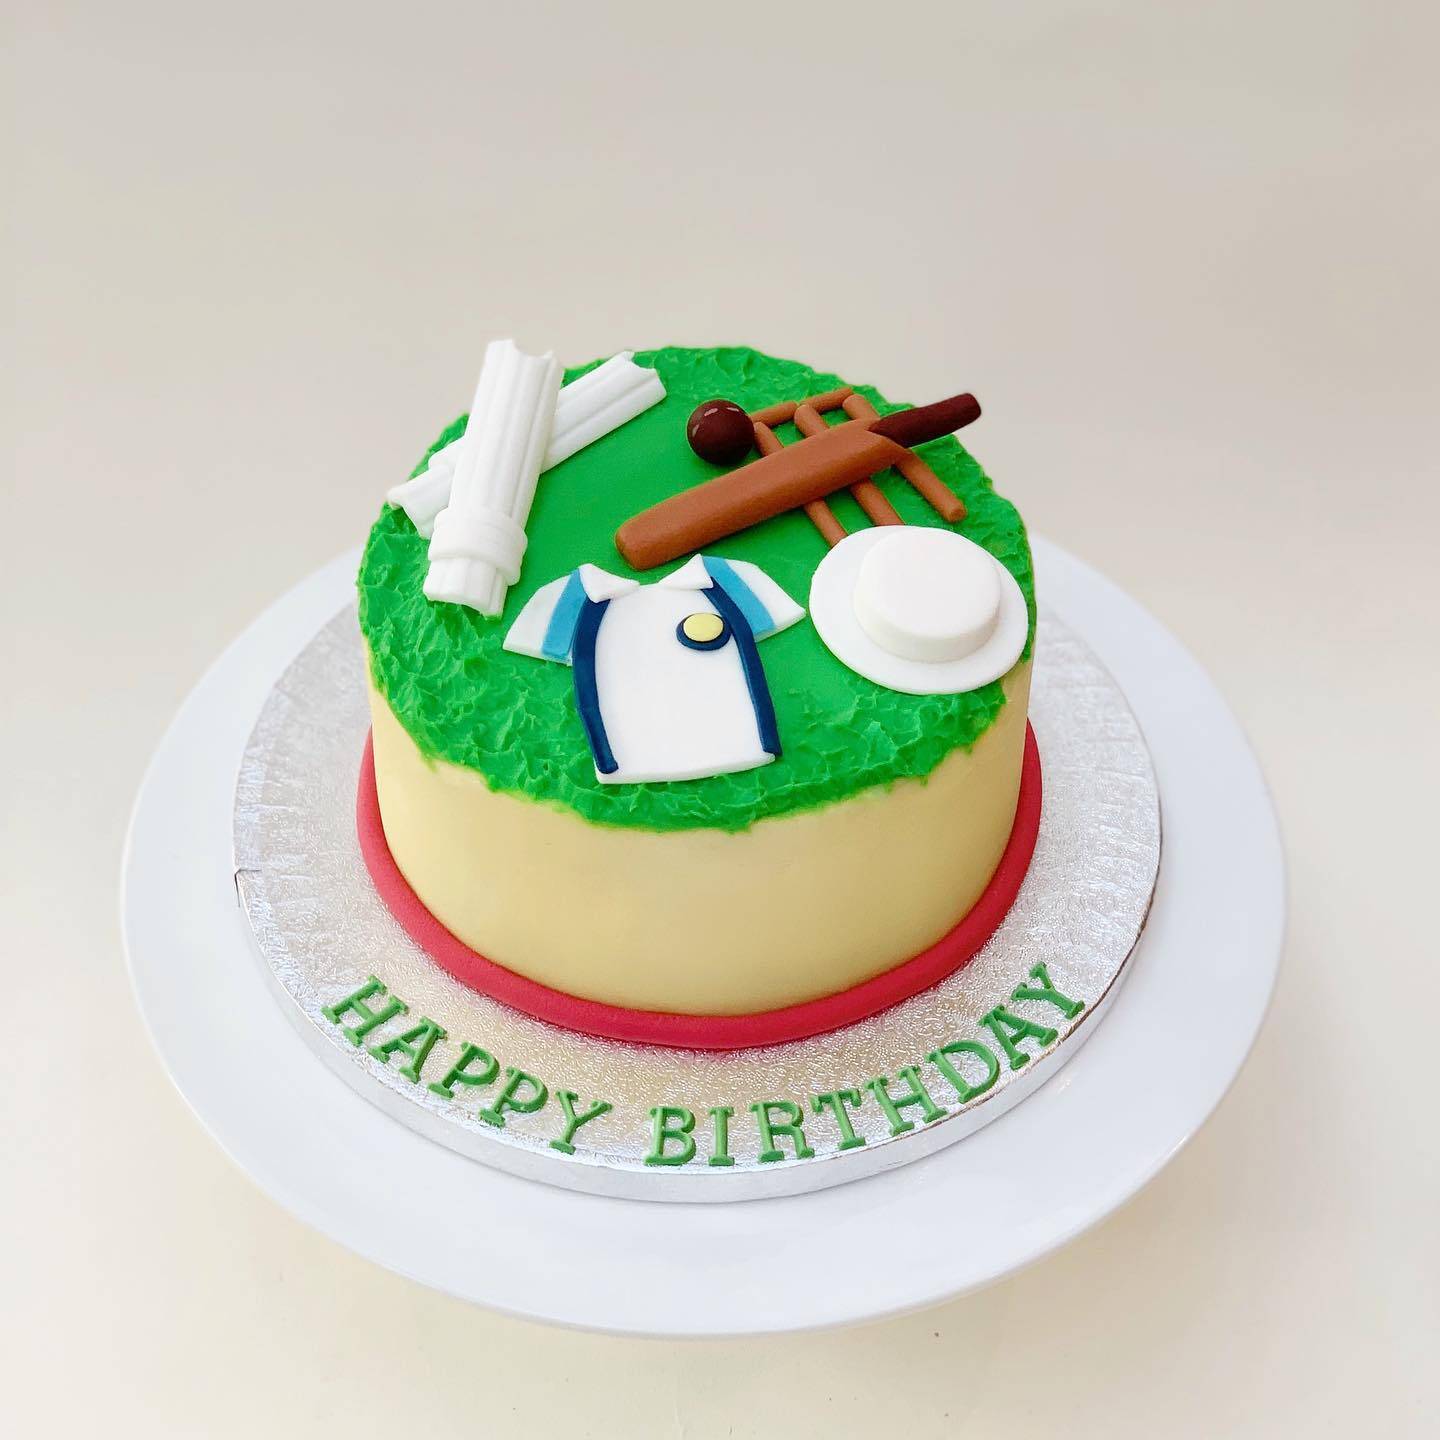 Cricket Fondant Decorations on a Delicious Red Velvet